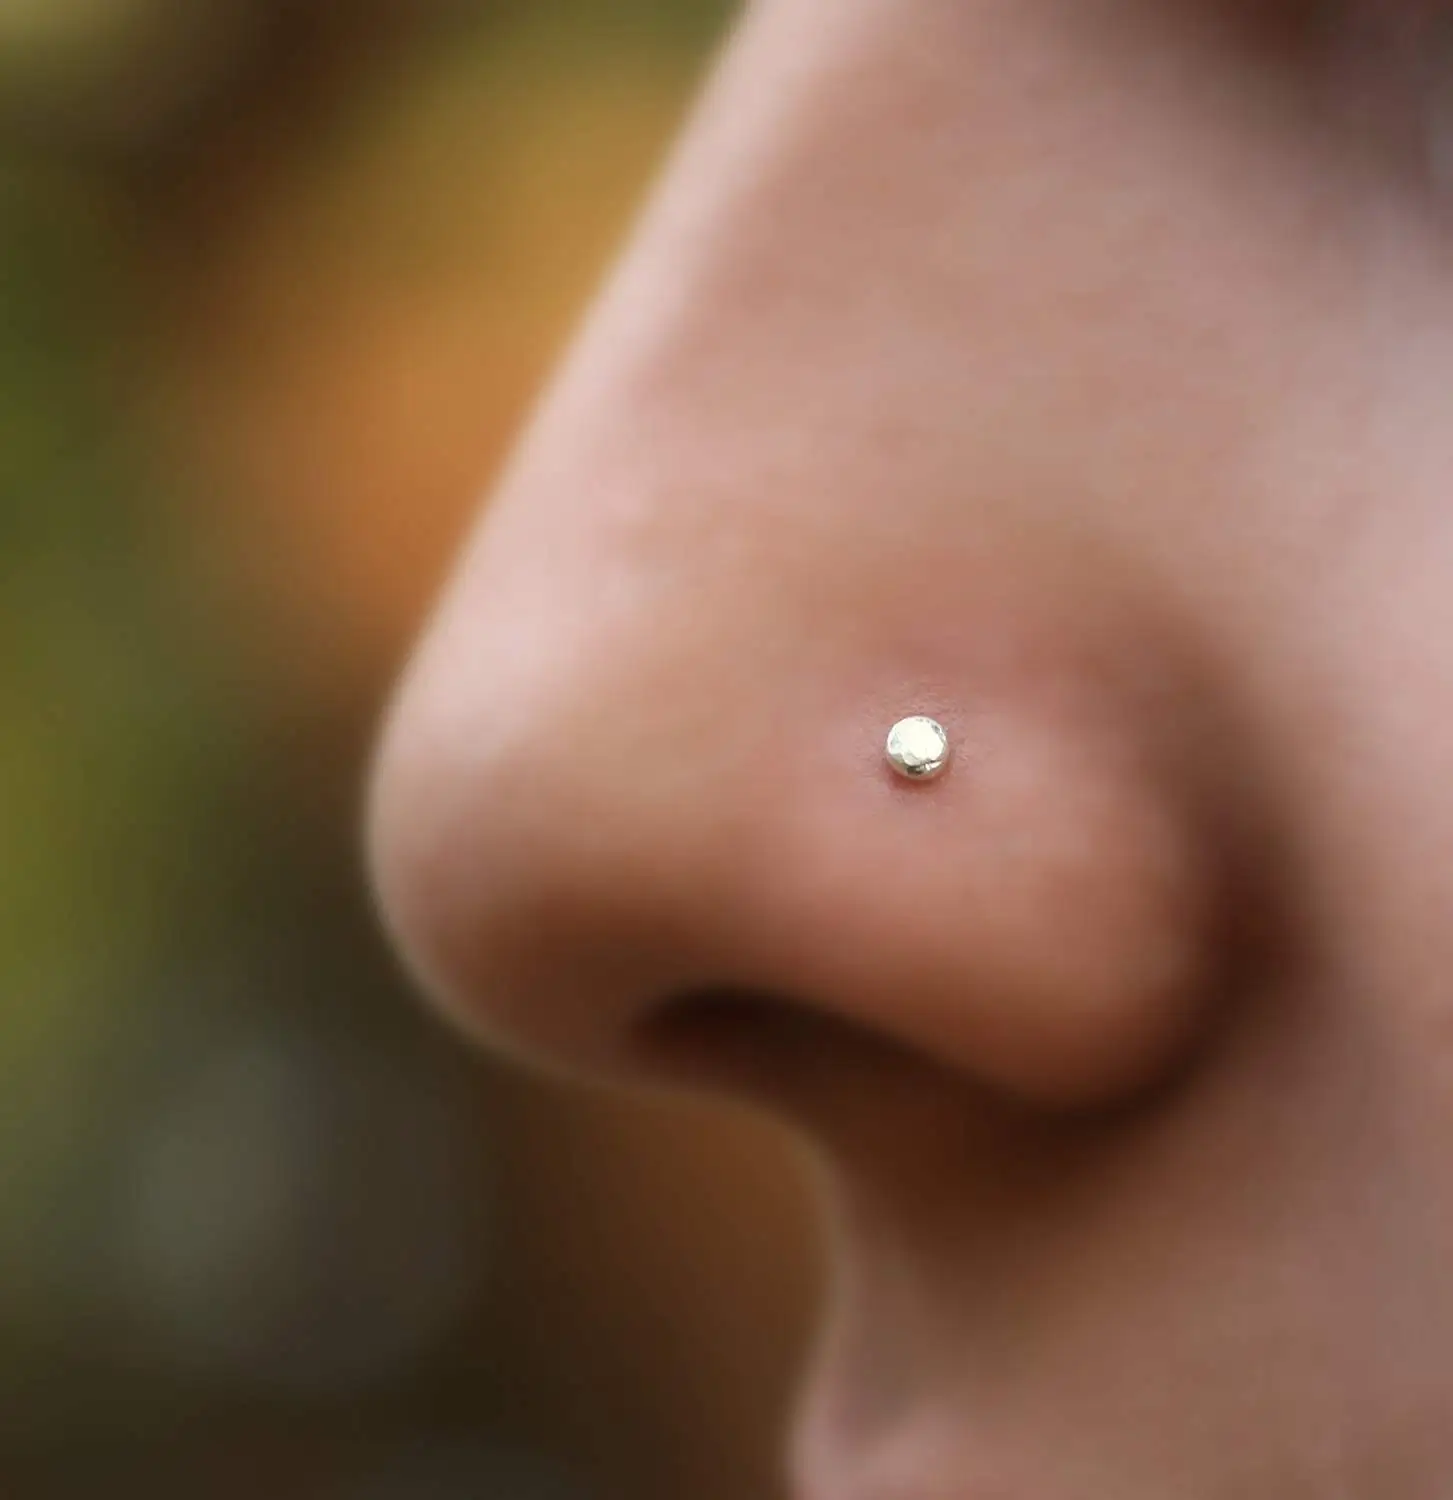 Cheap Nose Ring In Tragus, find Nose 